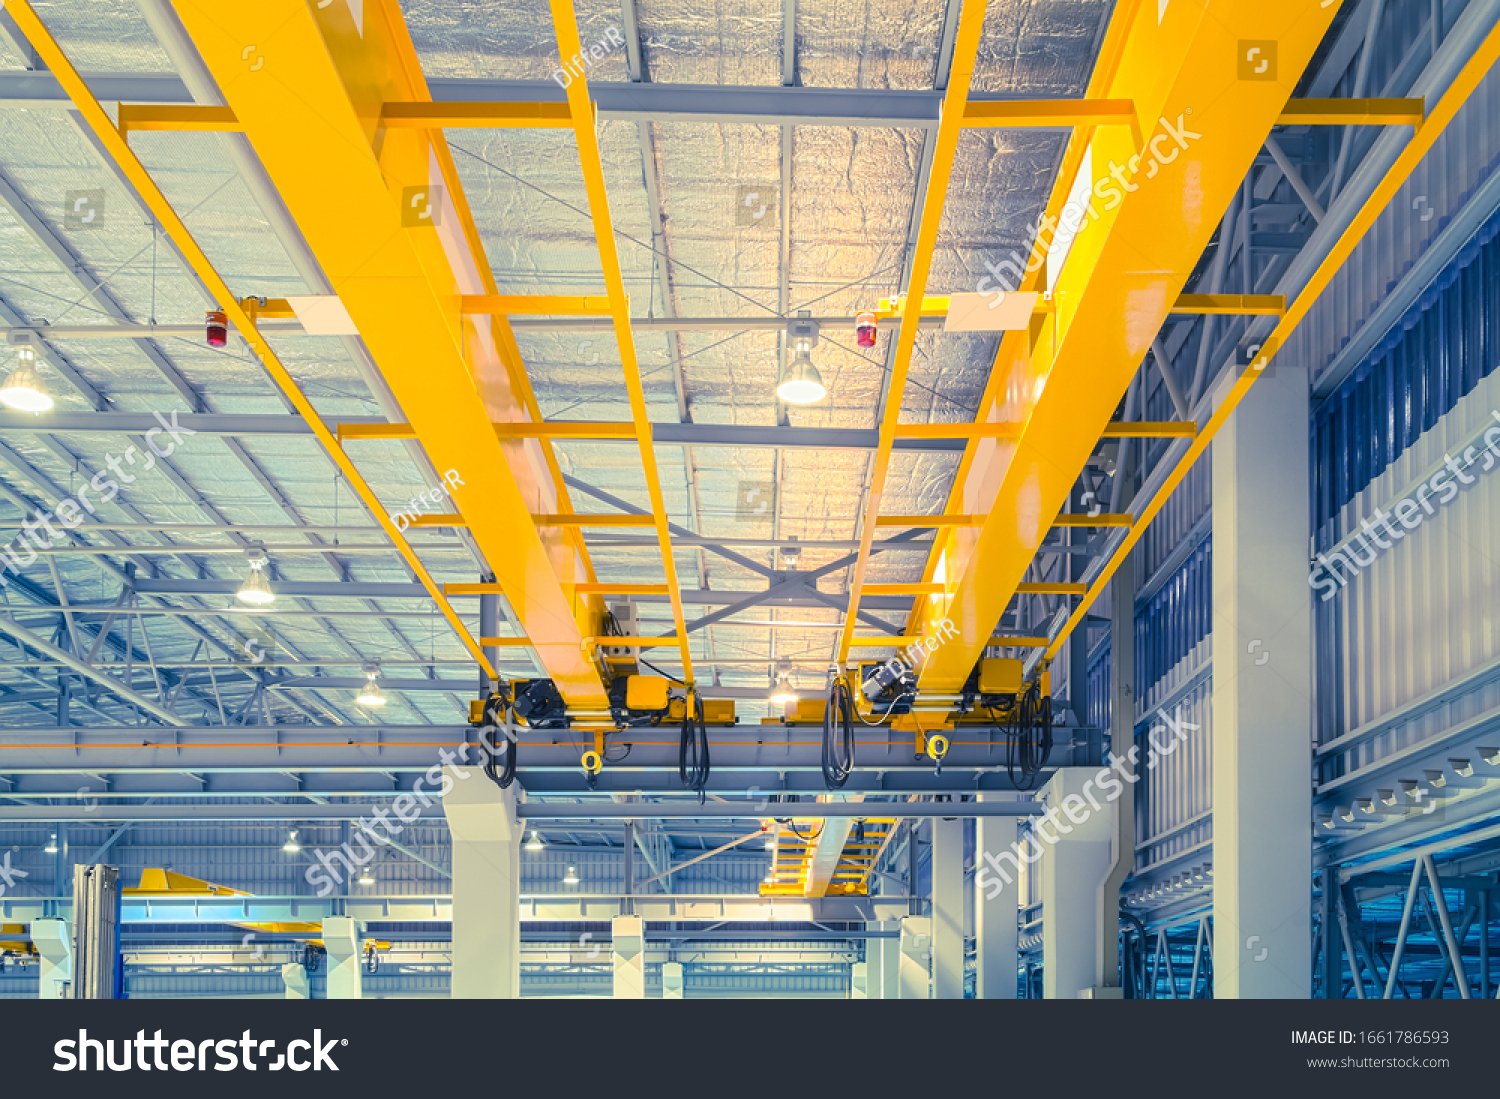 Overhead crane or bridge crane consists of parallel runways with a bridge between column also include hoist lifting and rope.
Machinery for manufacturing or transportation in factory or warehouse.ing. #1661786593